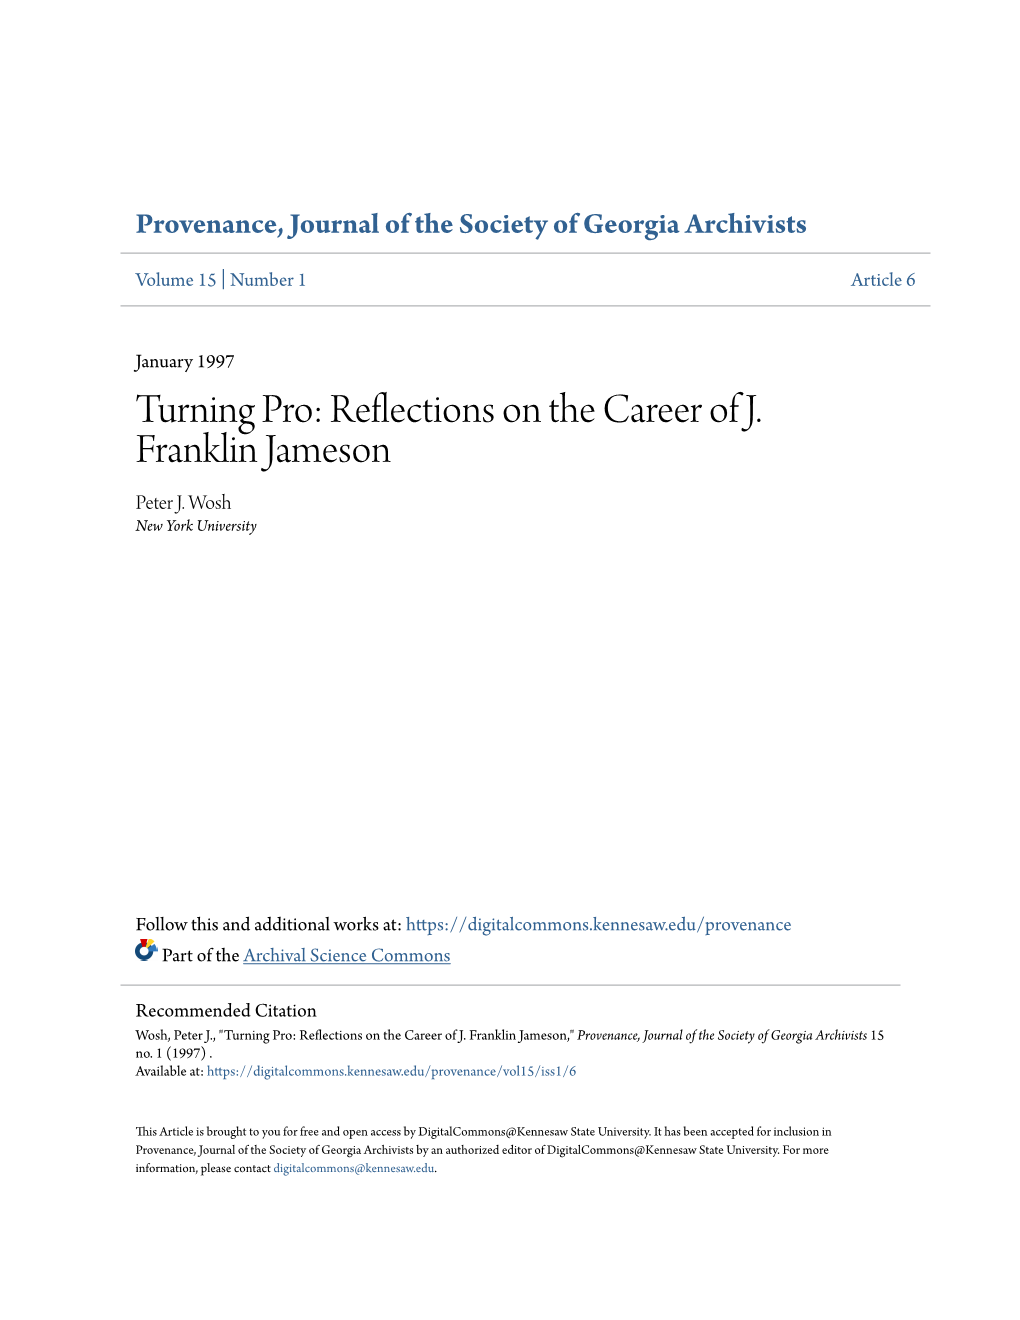 Turning Pro: Reflections on the Career of J. Franklin Jameson Peter J